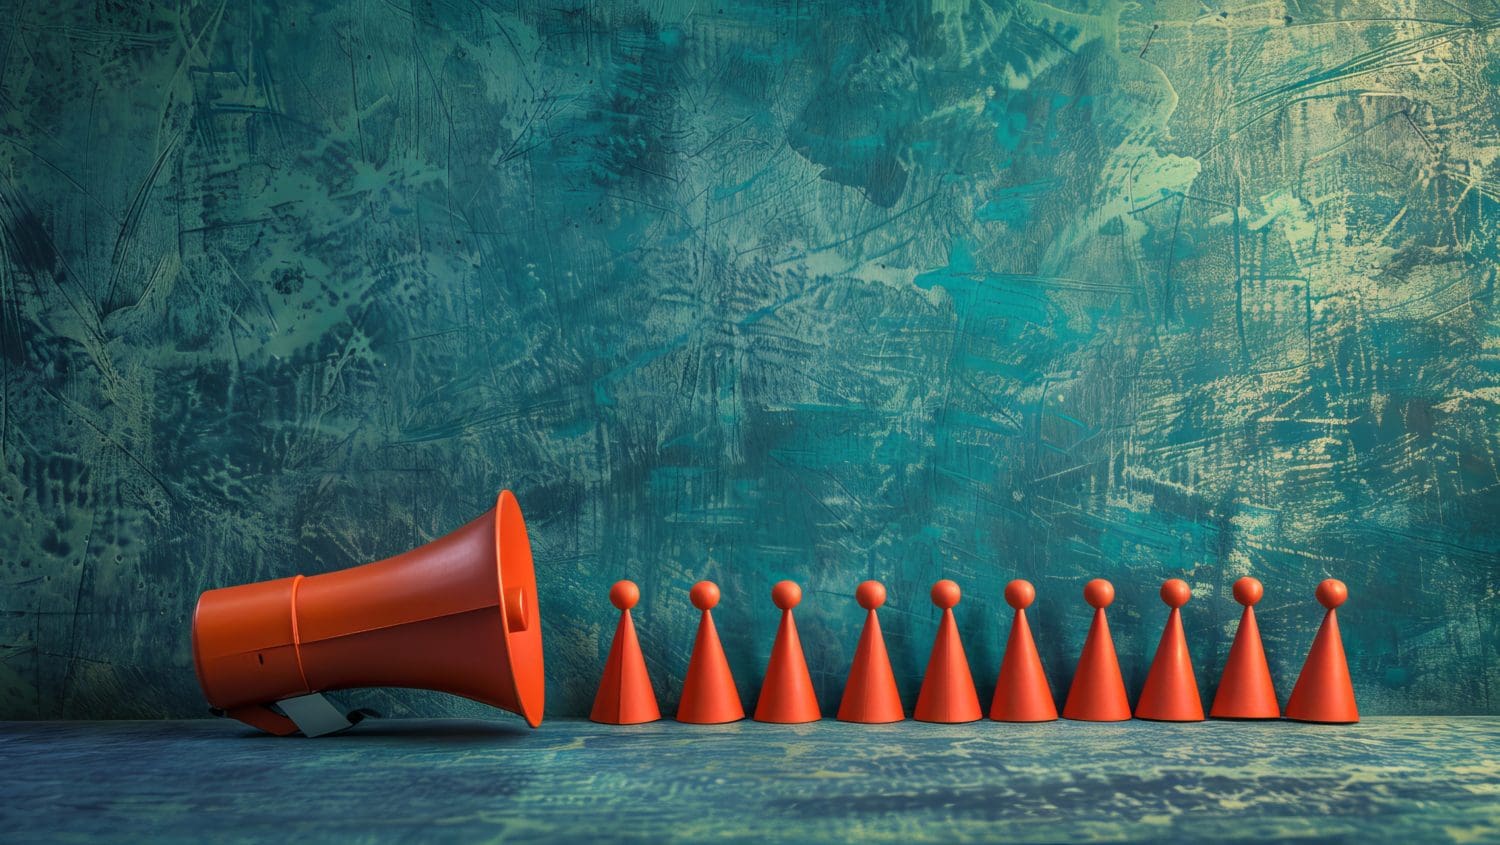 An orange megaphone on a textured green and blue background points towards a row of eight small orange cones arranged in a straight line, resembling a leader addressing followers.